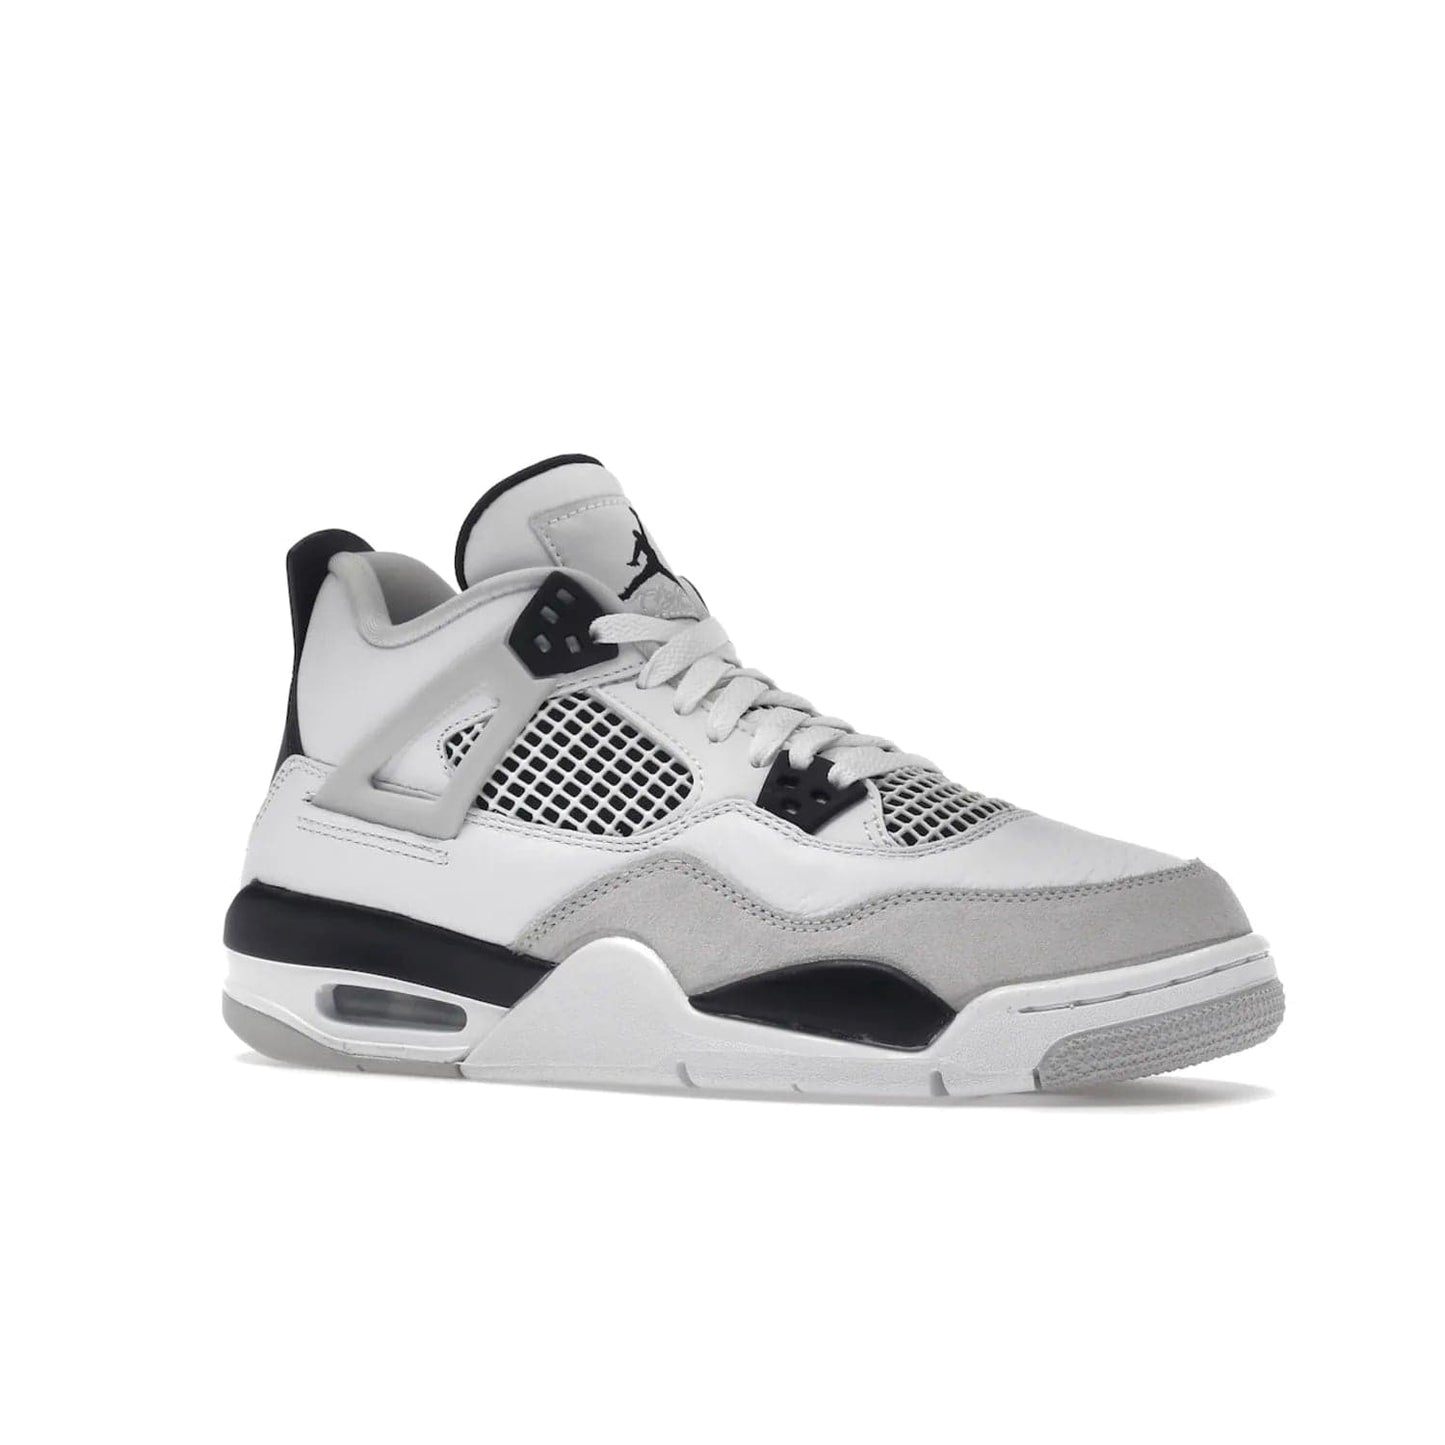 Jordan 4 Retro Military Black (GS) - Image 4 - Only at www.BallersClubKickz.com - A must-have for grade schoolers, the Air Jordan 4 Retro Military Black (GS) offers classic style with plenty of breathable support. Featuring a white sole and base with suede and leather overlays in subtle black and grey tones, the shoes are perfect for active pursuits and everyday comfort. Get an instant classic today!